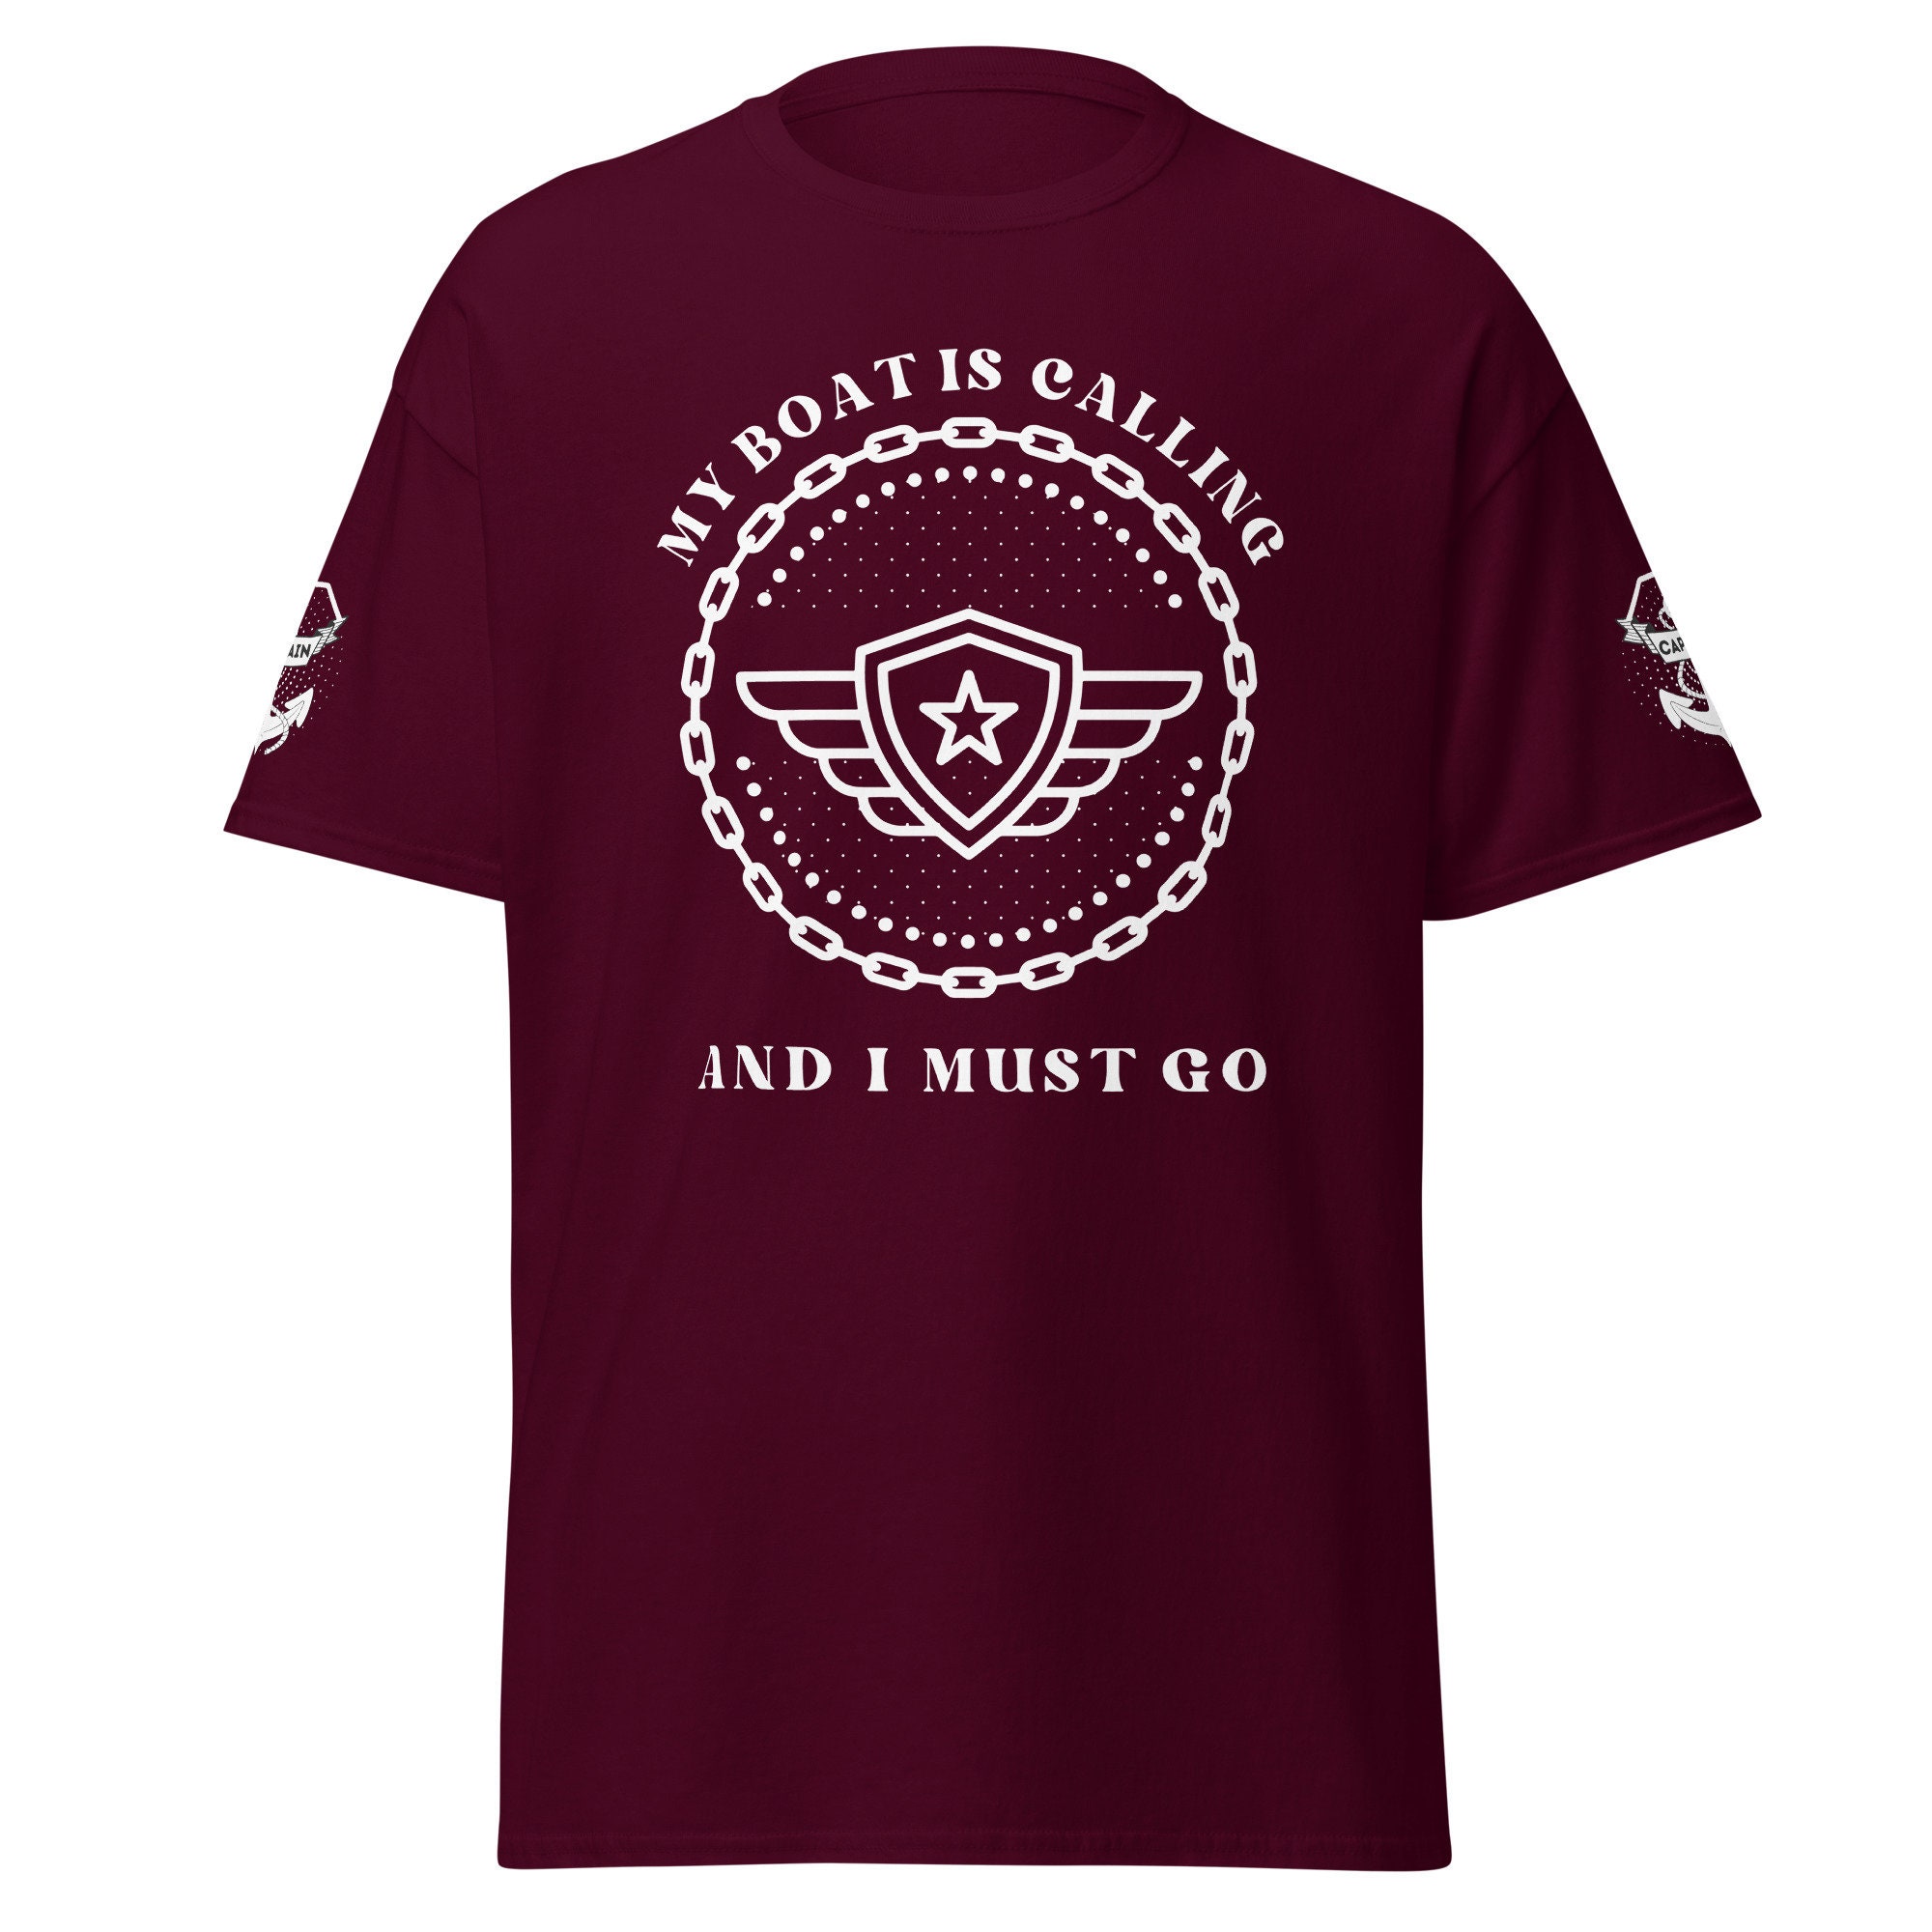 Premium Boat & Yacht Lover's T-shirt Nautical Adventure, Captain, Sailing  Enthusiast, Summer Fashion Perfect for Boat/yacht Enthusiasts 